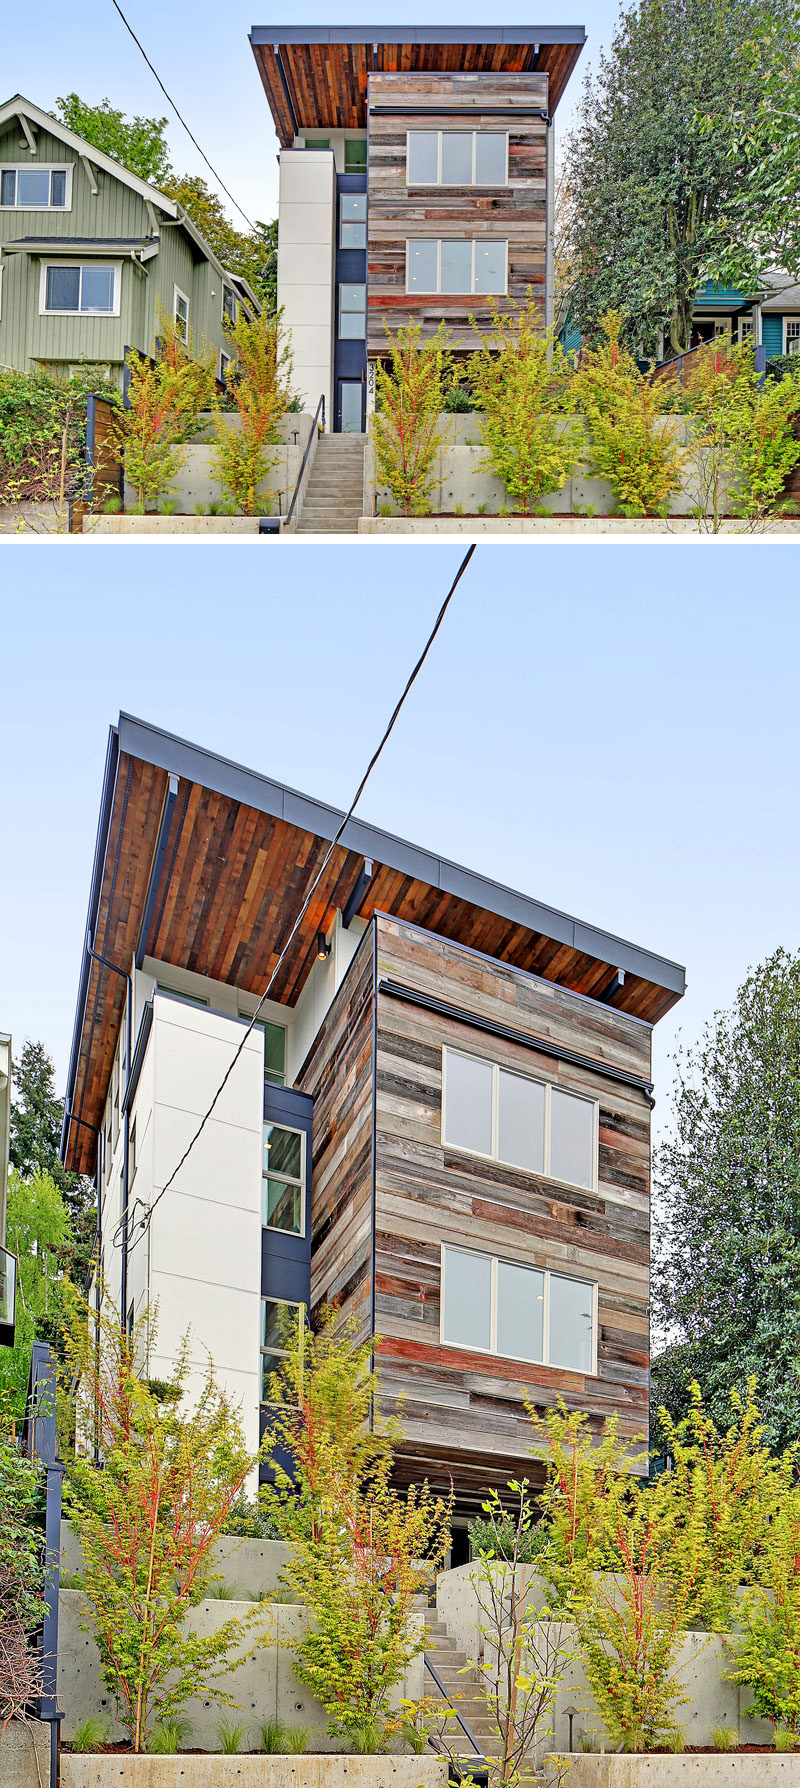 With sustainability in mind, this modern house in Seattle is made from recycled wood and locally sourced materials. 